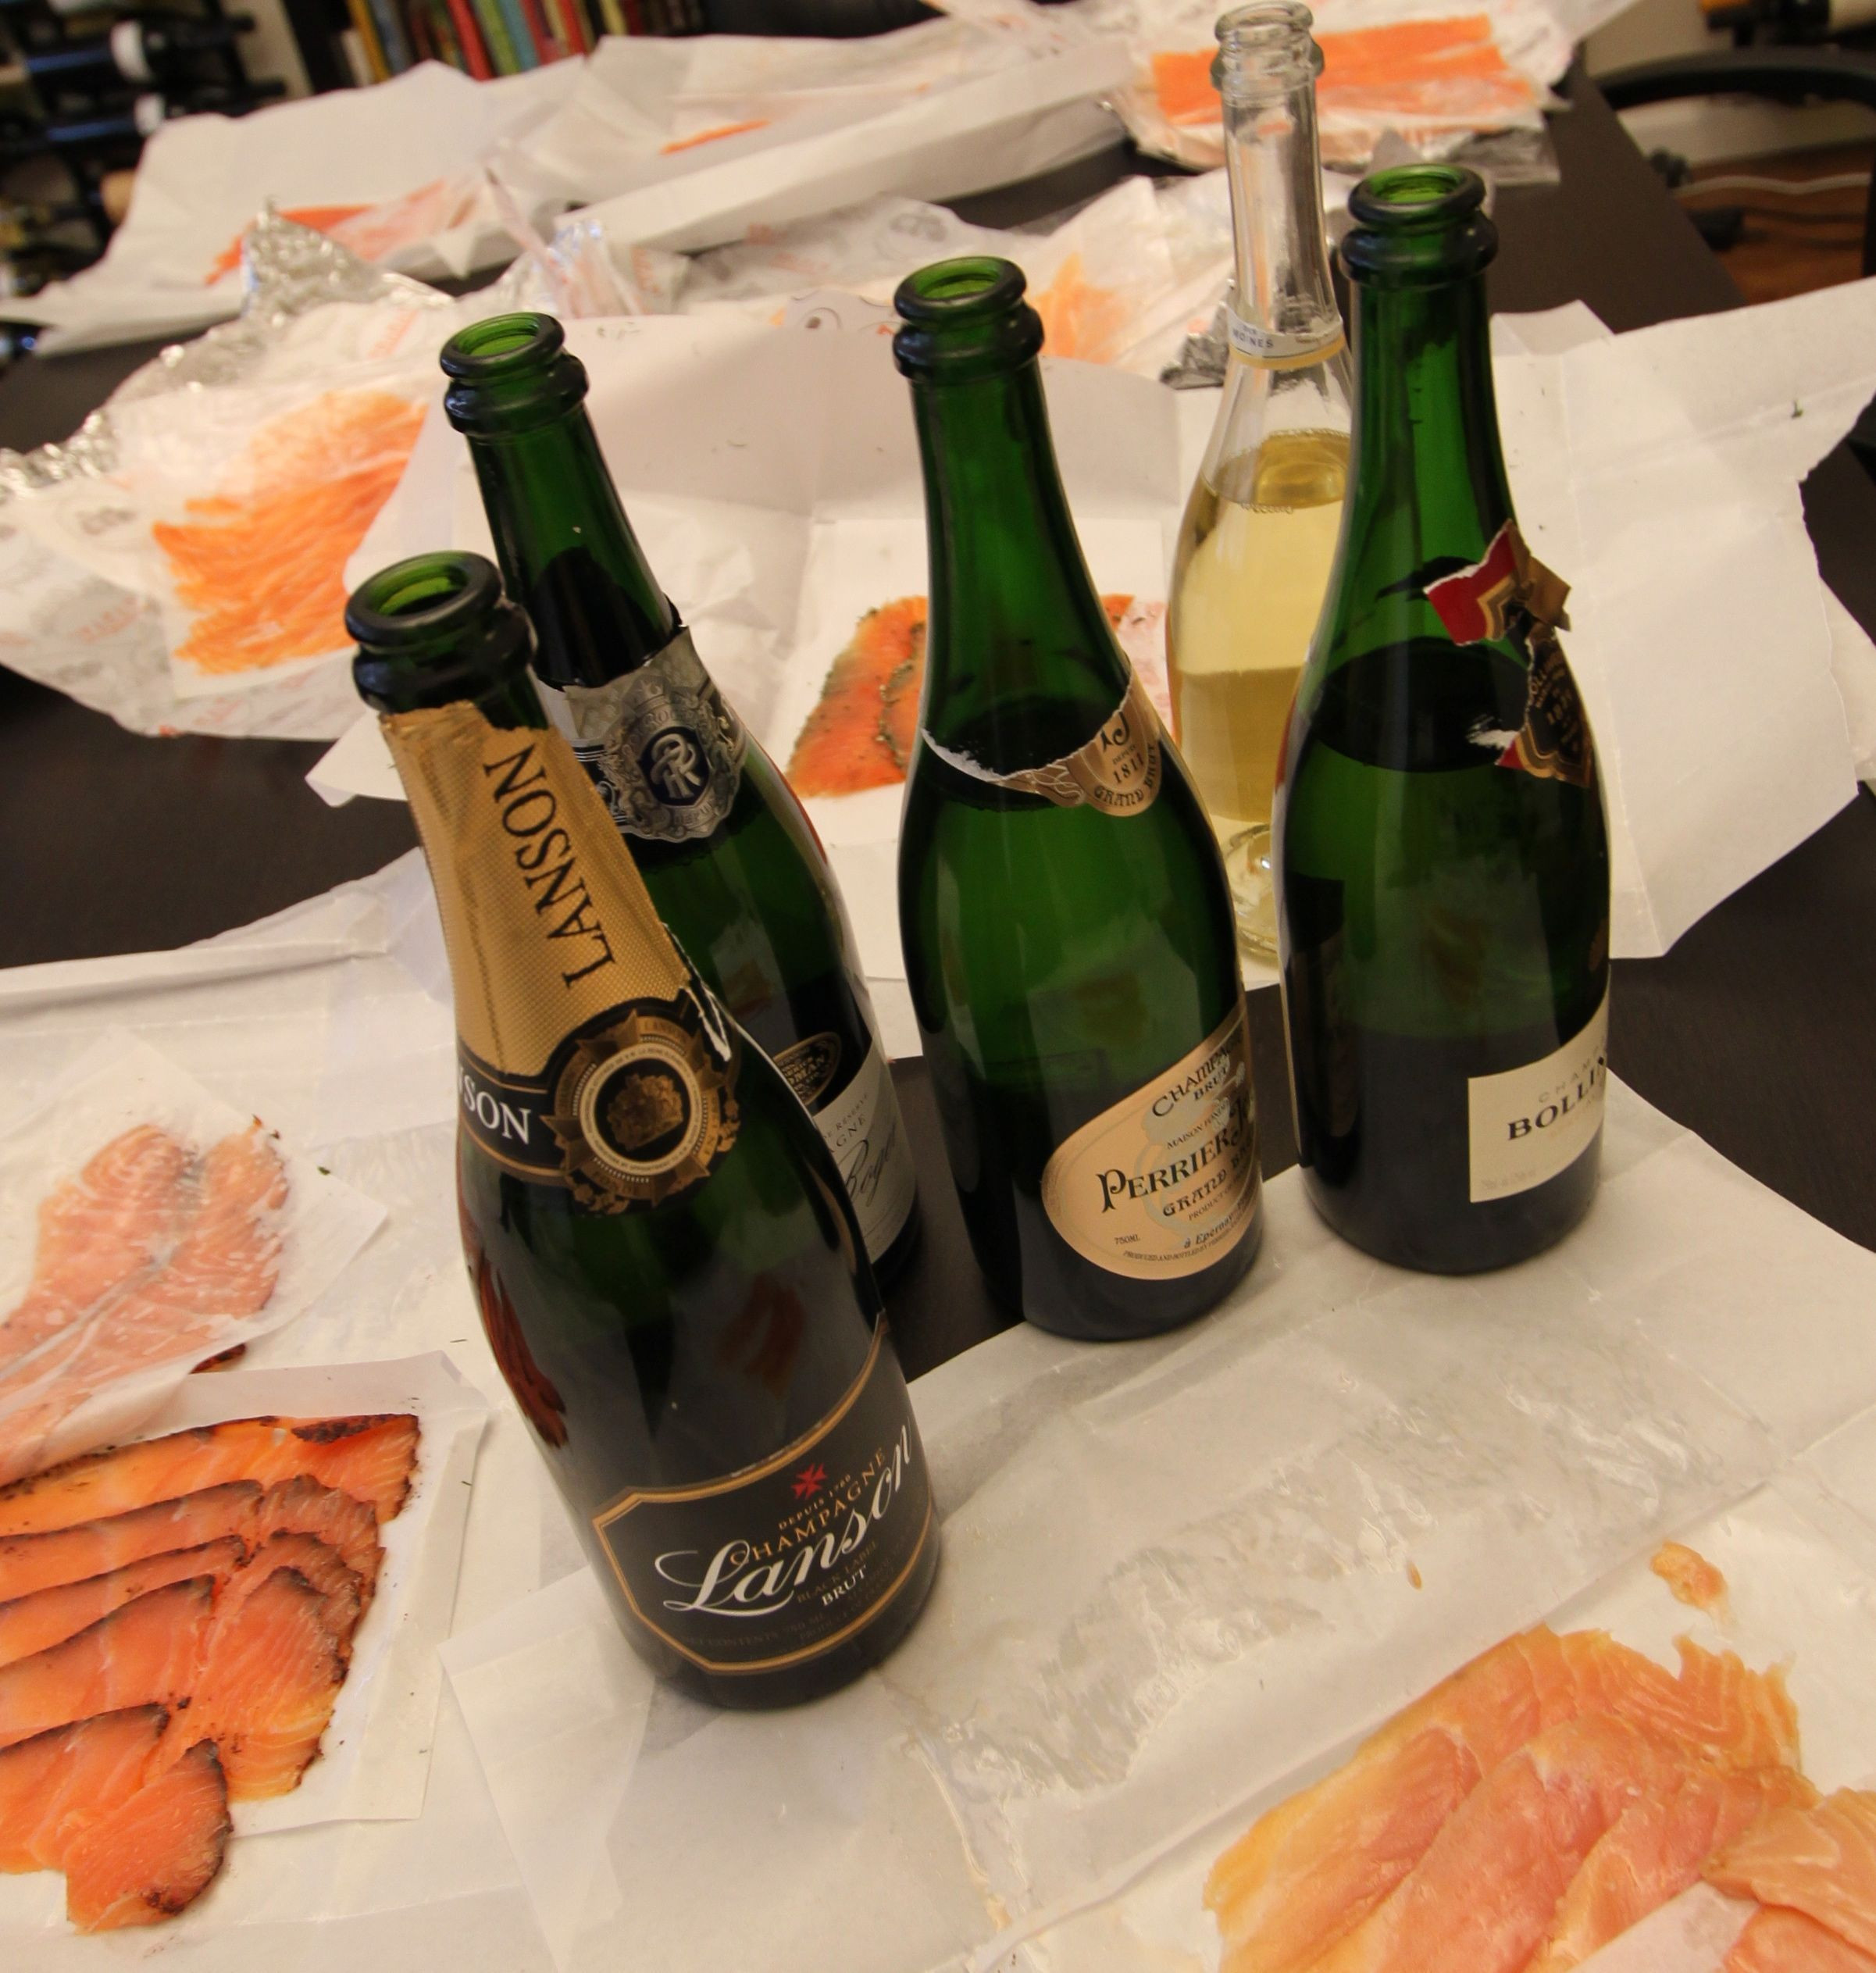 Smoked Salmon Wine Pairing
 Champagne and Smoked Salmon Results from a very special